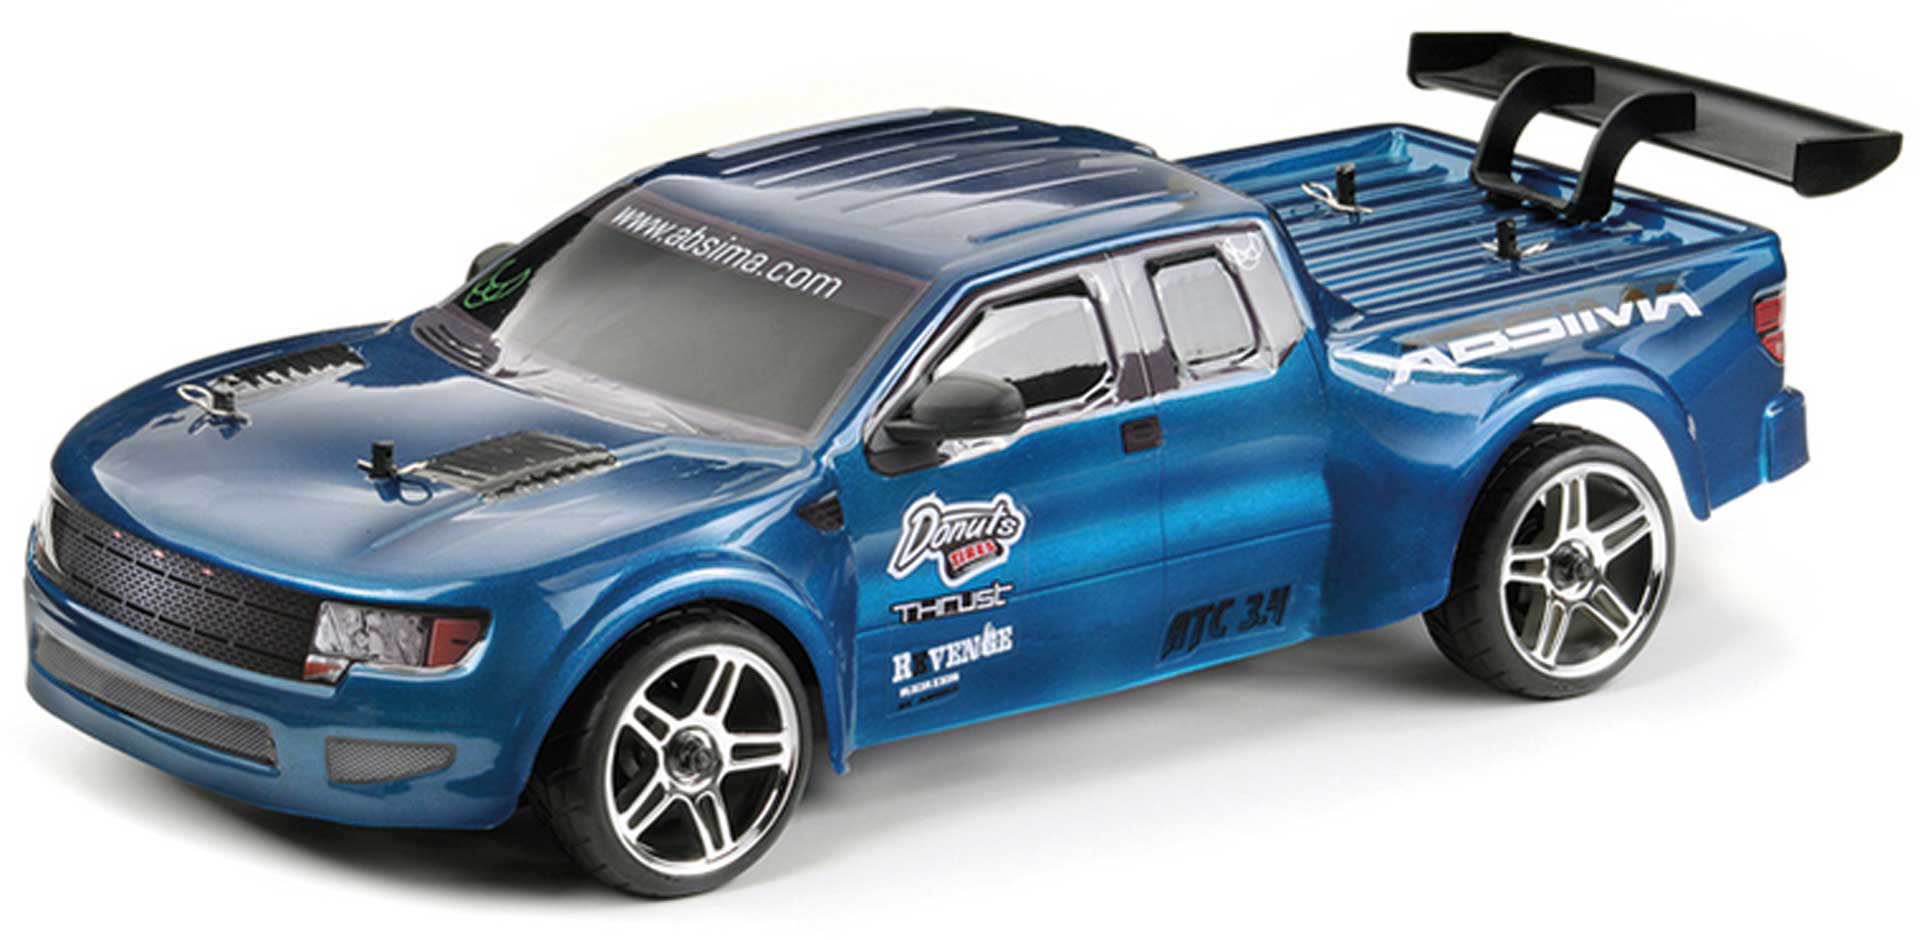 ABSIMA ATC 3.4 HOT SHOT TOURING CAR 4WD 1/10 RTR WITHOUT BATTERY AND CHARGER